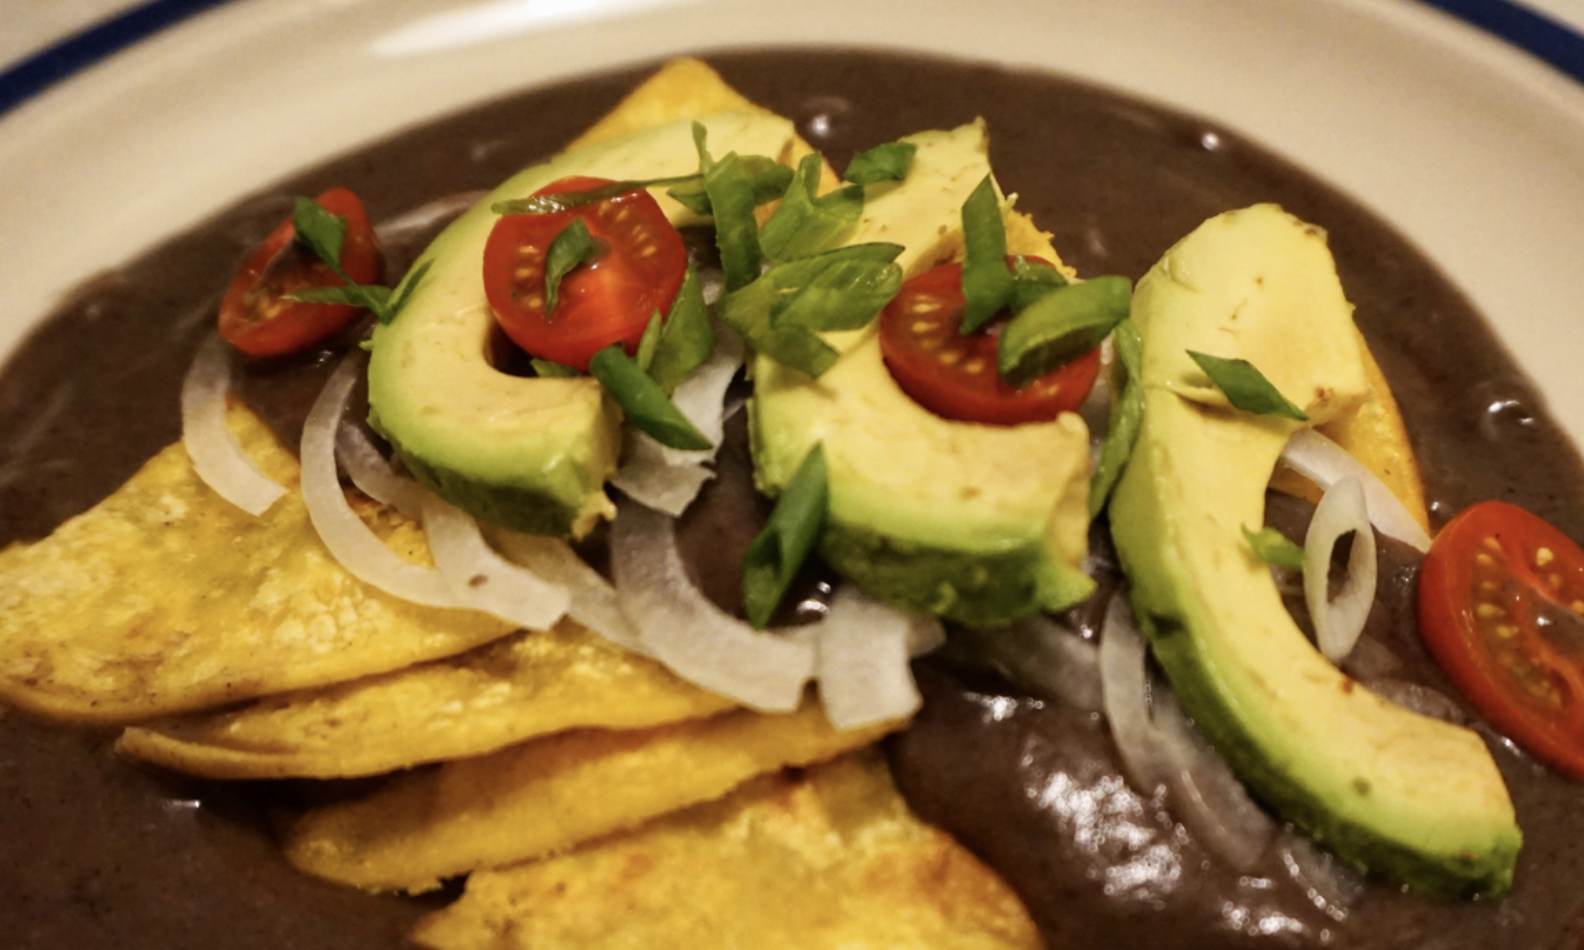 Black bean puree with tortillas, tomatoes, and avocados on top of it